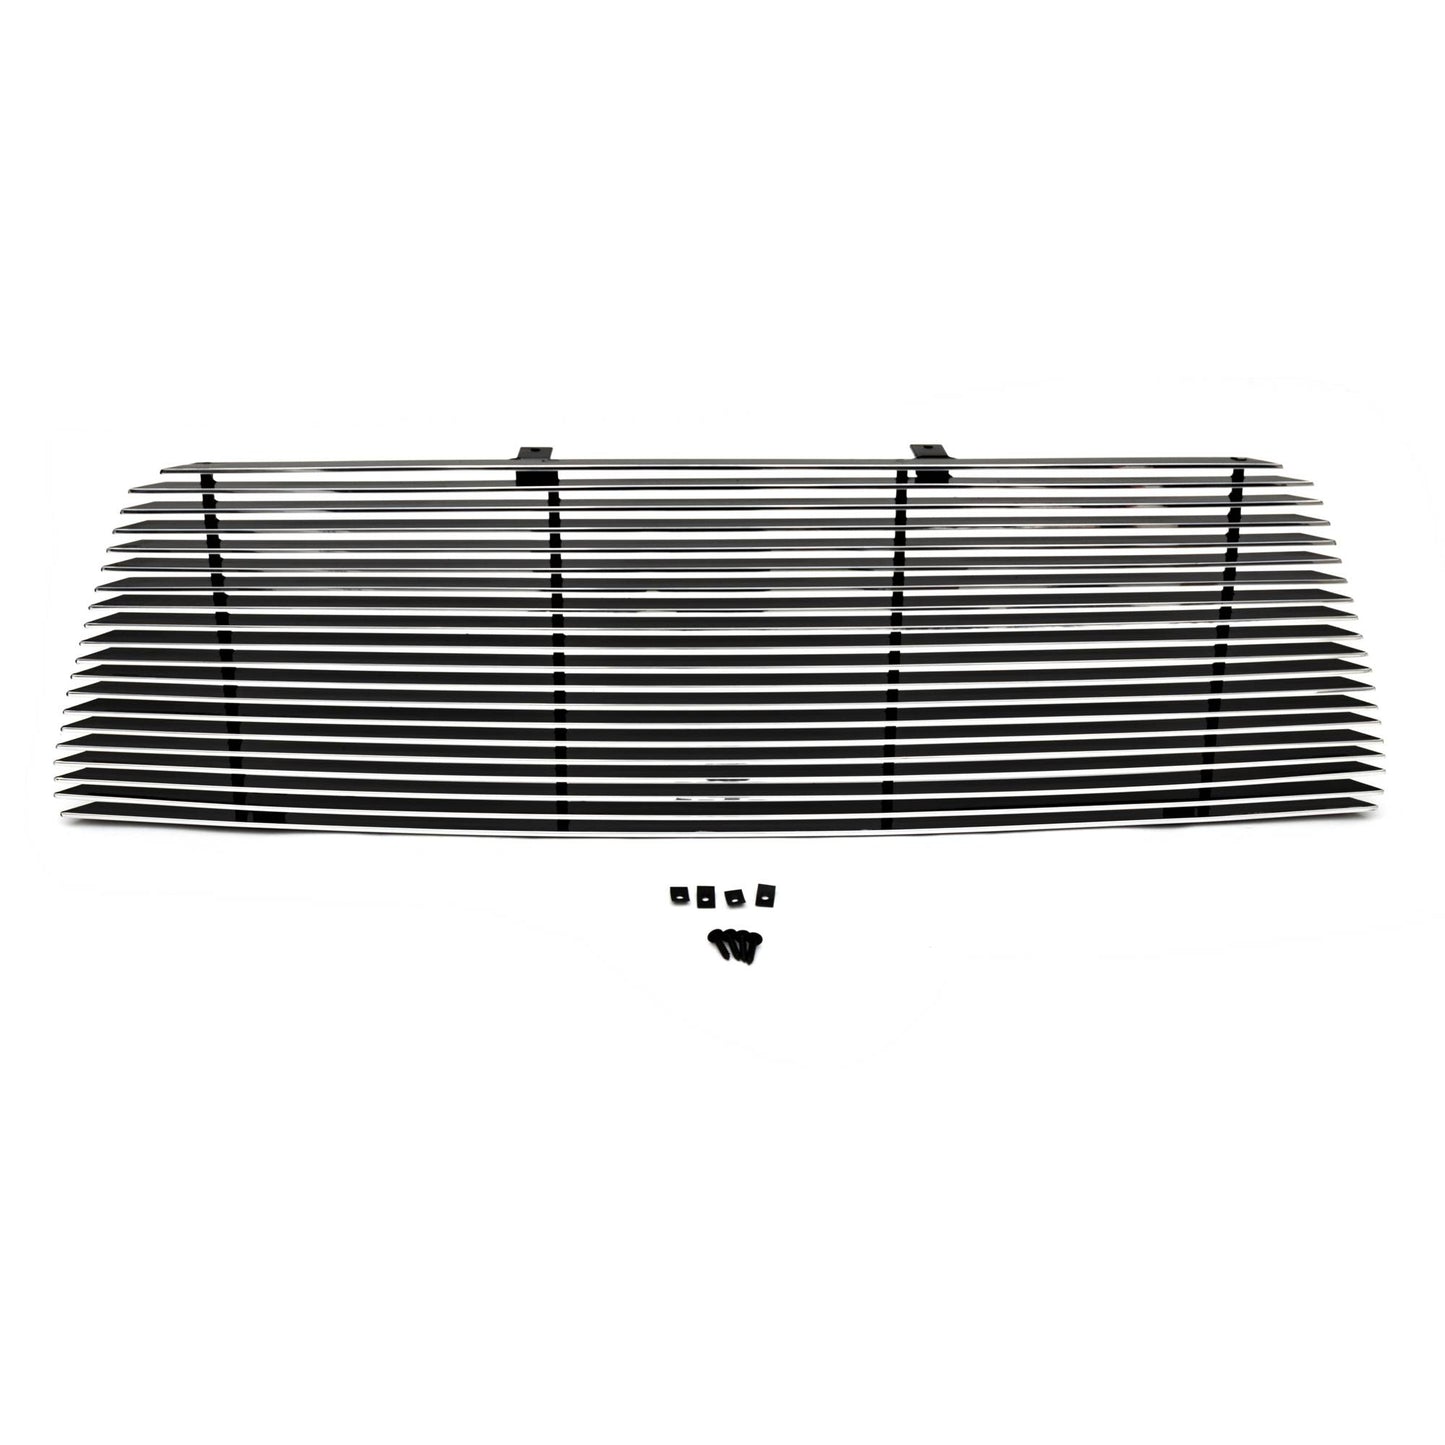 T-REX Grilles 20895 Polished Aluminum Horizontal Grille Fits 2005-2010 Toyota Tacoma